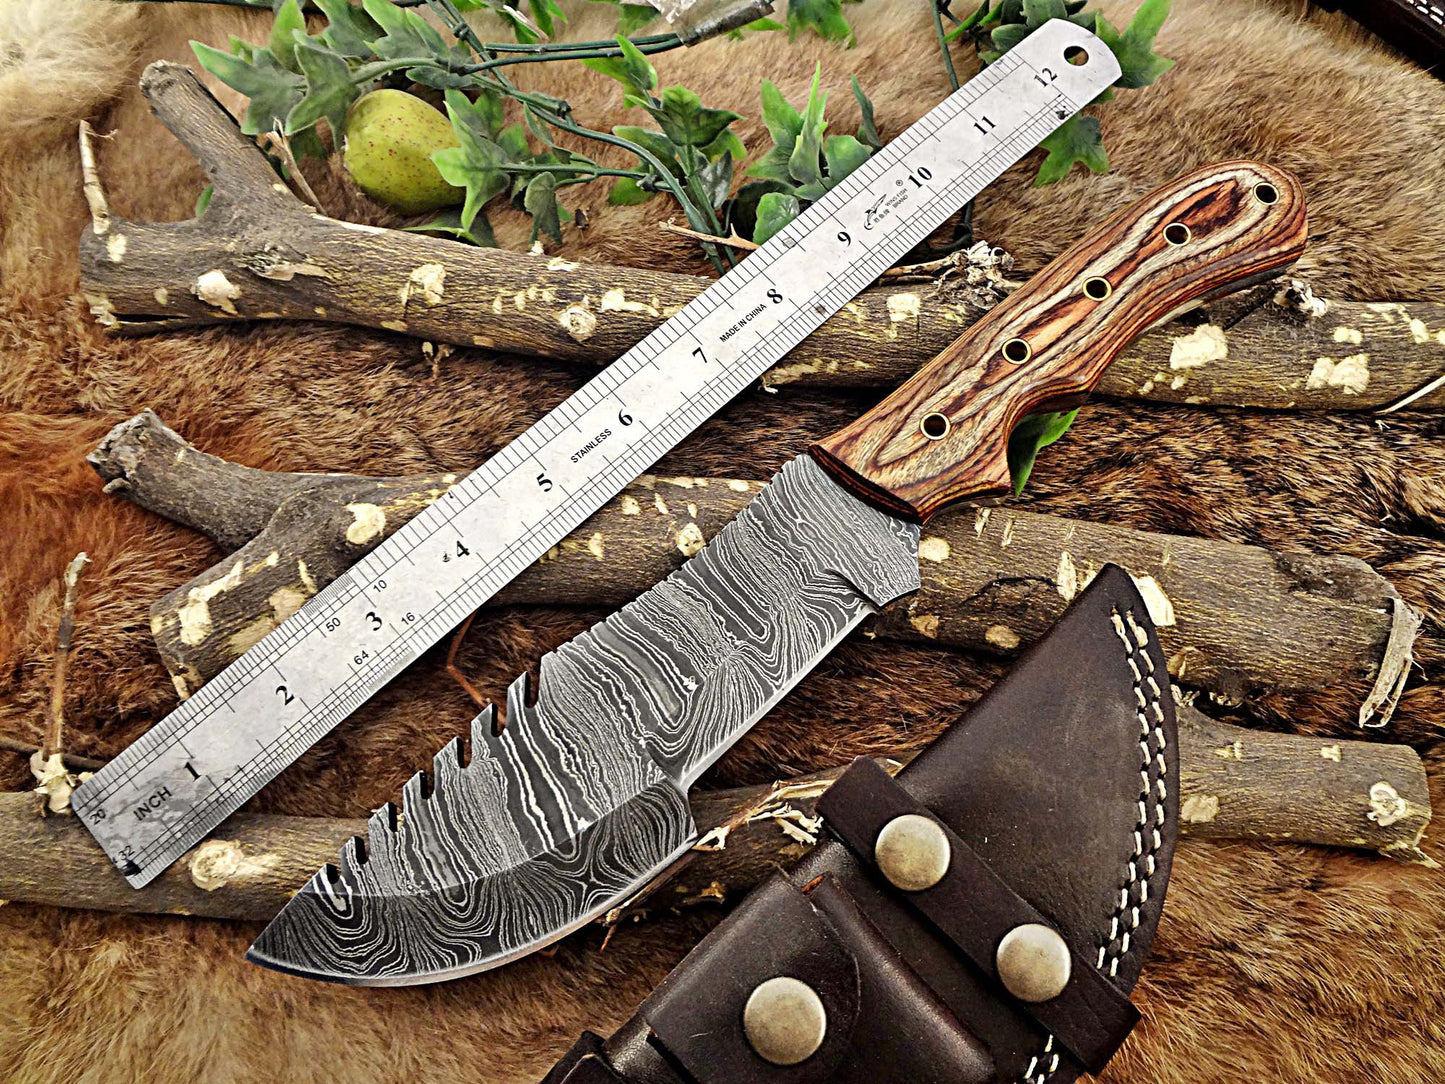 13" Long hand forged twist pattern full tang Damascus steel tracker knife, 2 tone brown dollar wood with holes scale, Cow leather sheath